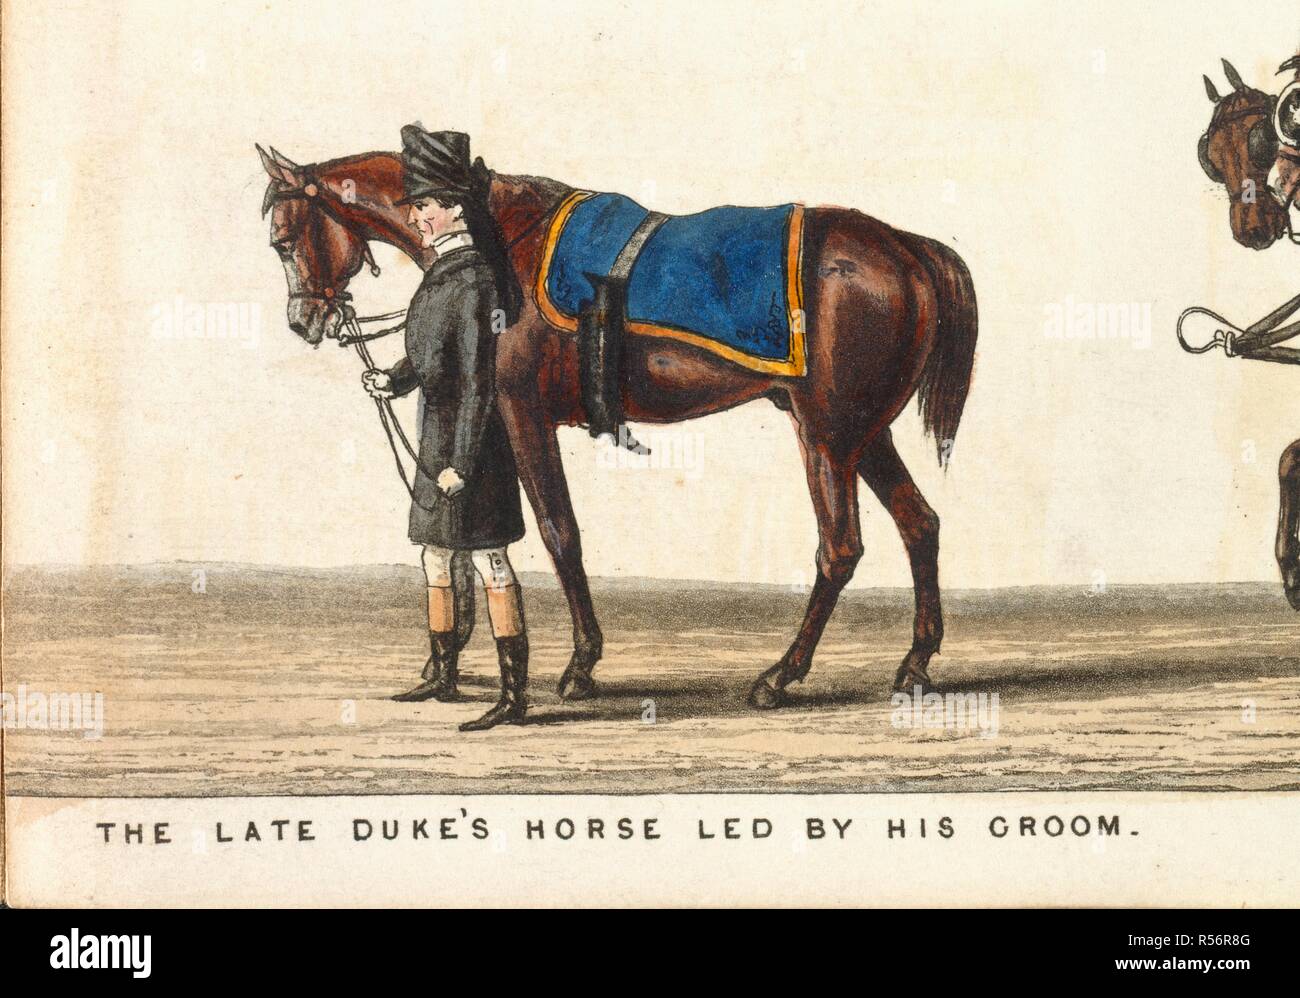 The late Duke's horse led by his groom. Wellington's boots, hang, reversed.  The funeral procession. [sic] of Arthur Duke of Wellington. London :  published March 1, 1853. by Ackermann & Co. Source: